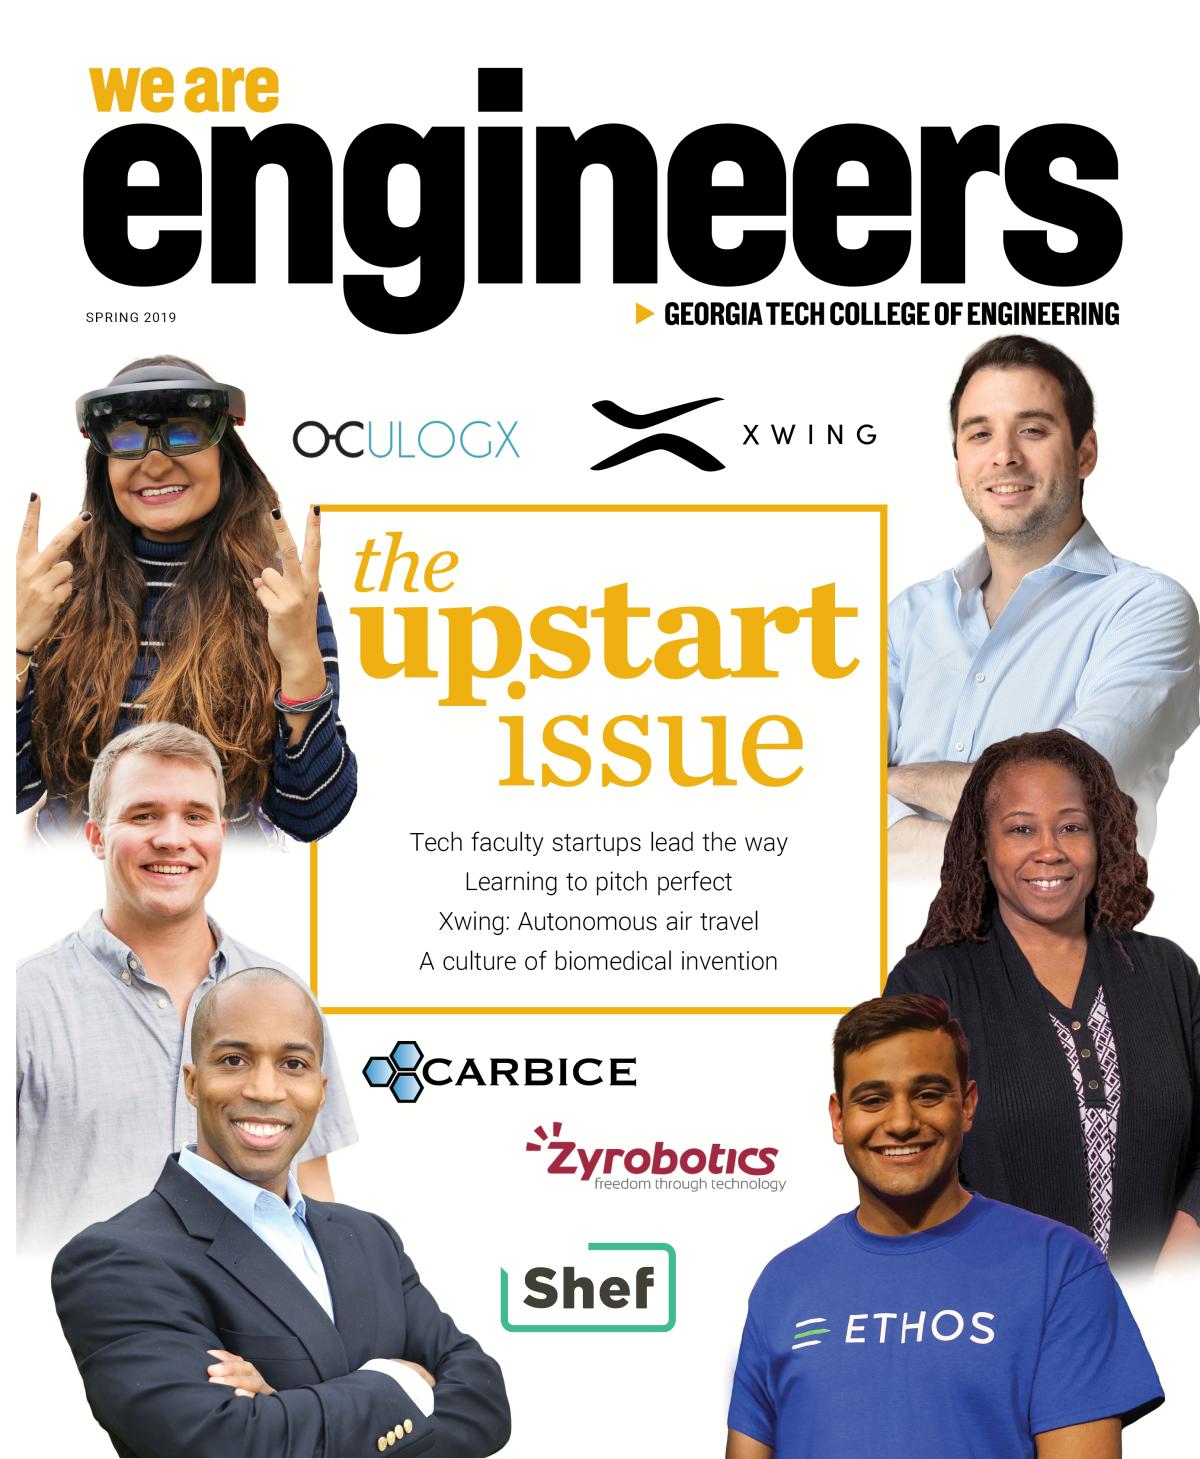 "We Are Engineers" magazine cover with a collage of faces and logos and the title "The Upstart Issue"